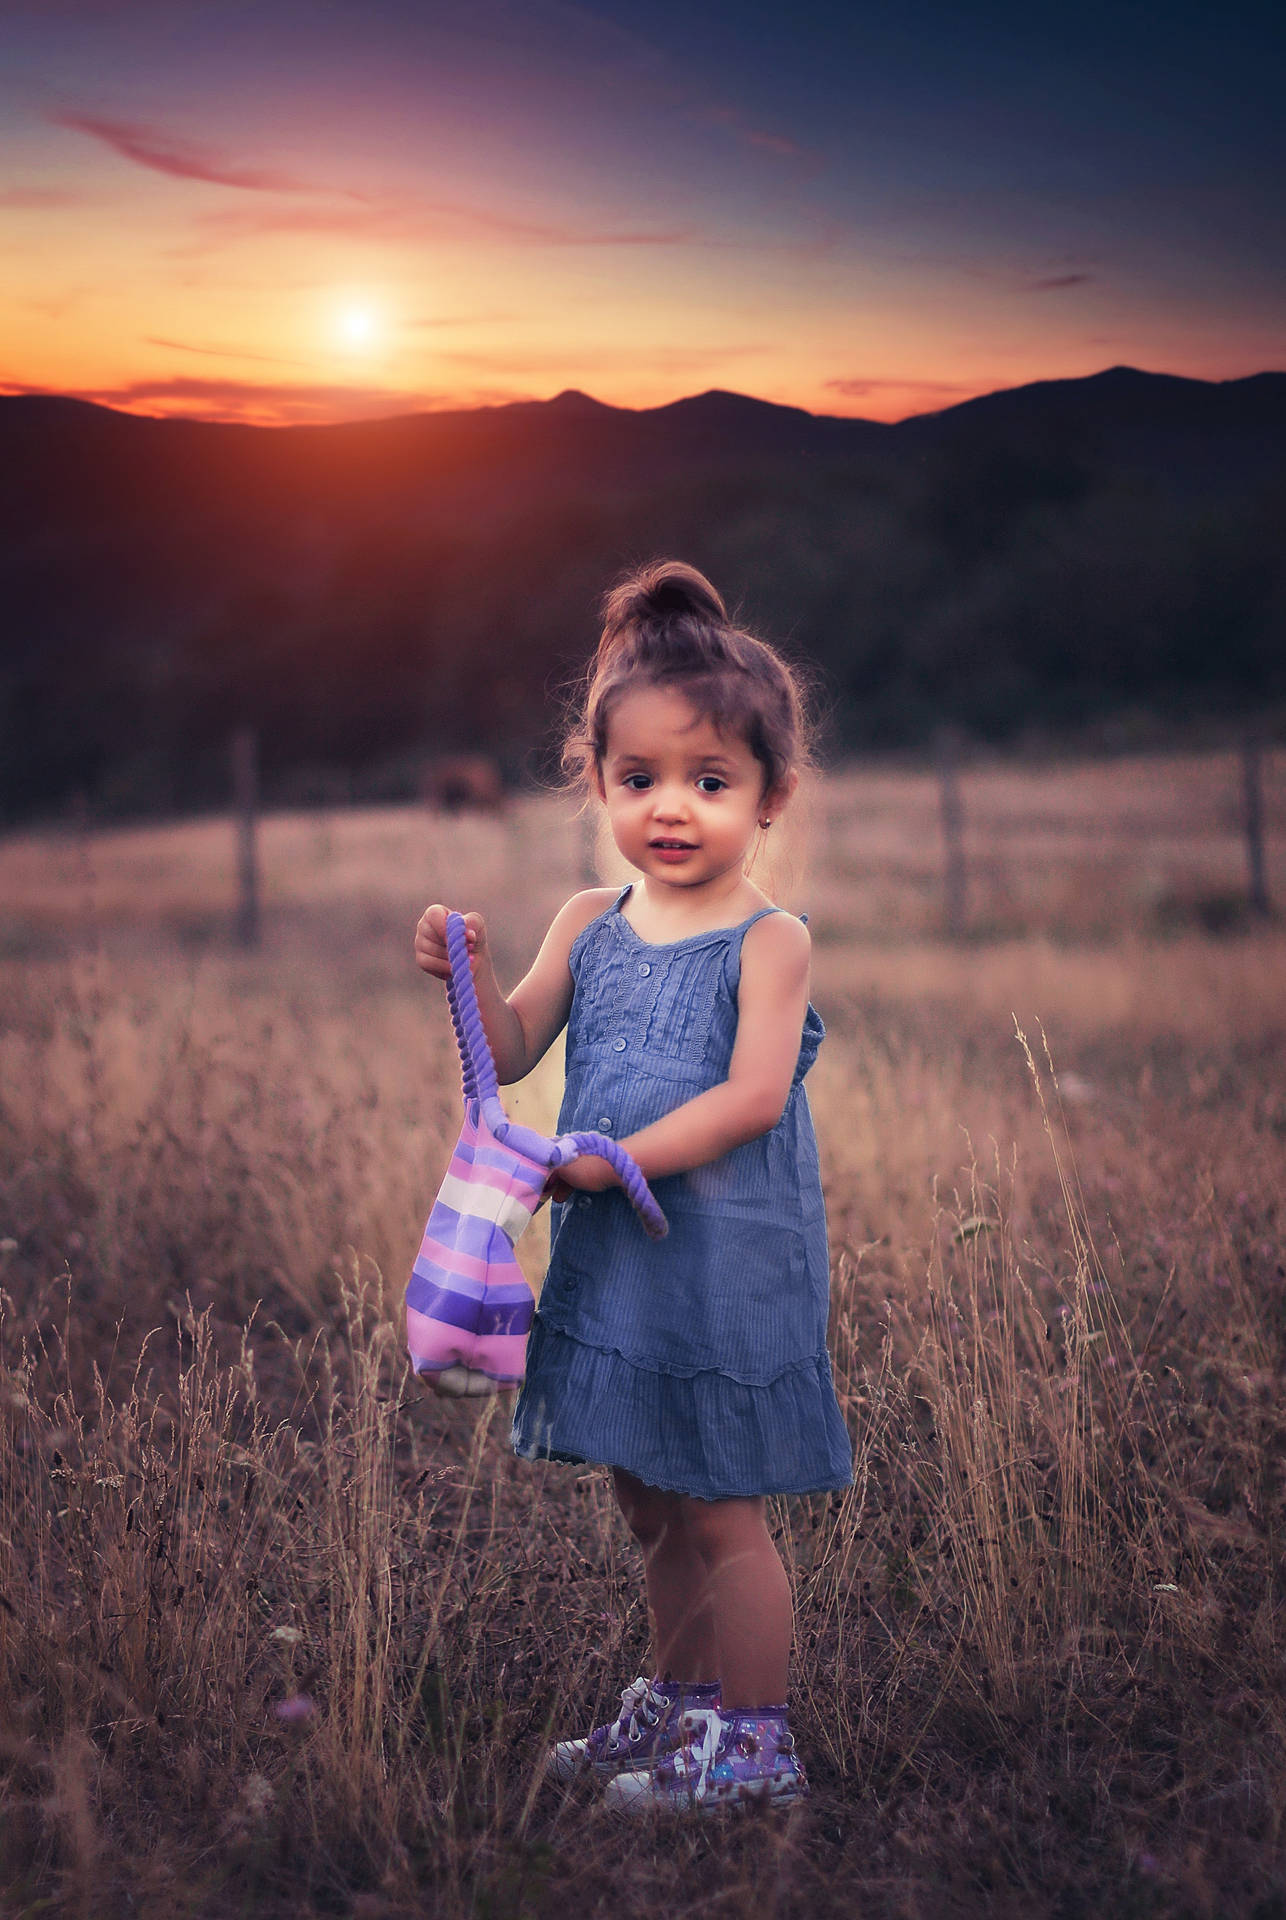 Cute Girl With Bag In Grass Field Wallpaper